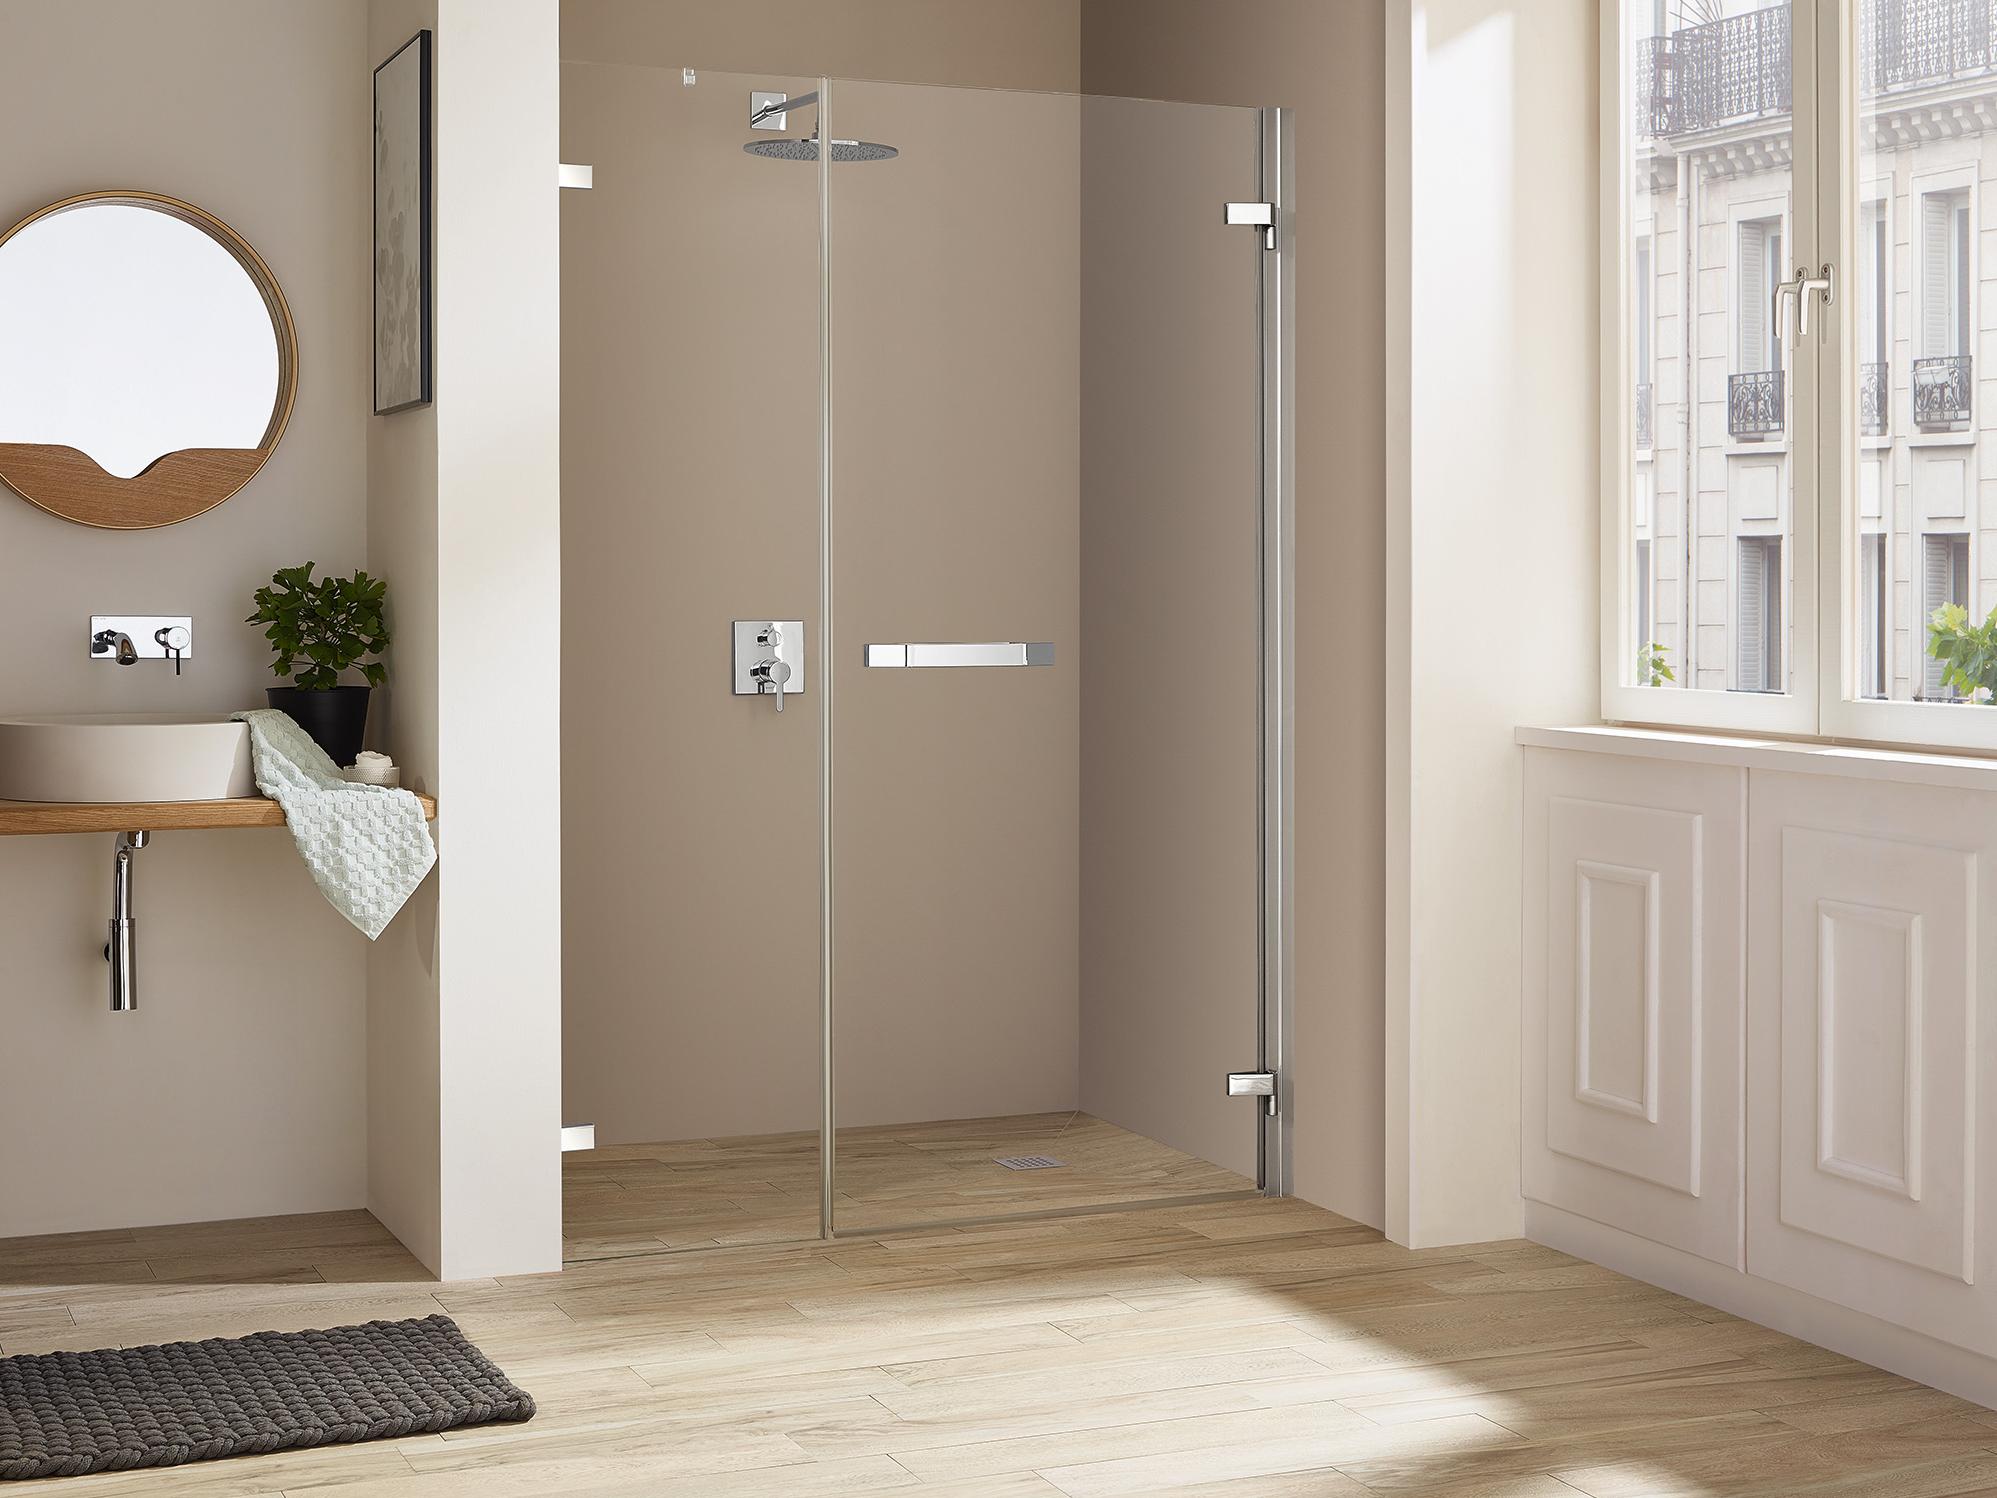 Kermi hinged shower enclosure, TUSCA single panel hinged door and fixed panel (wall hinge on the fixed panel)